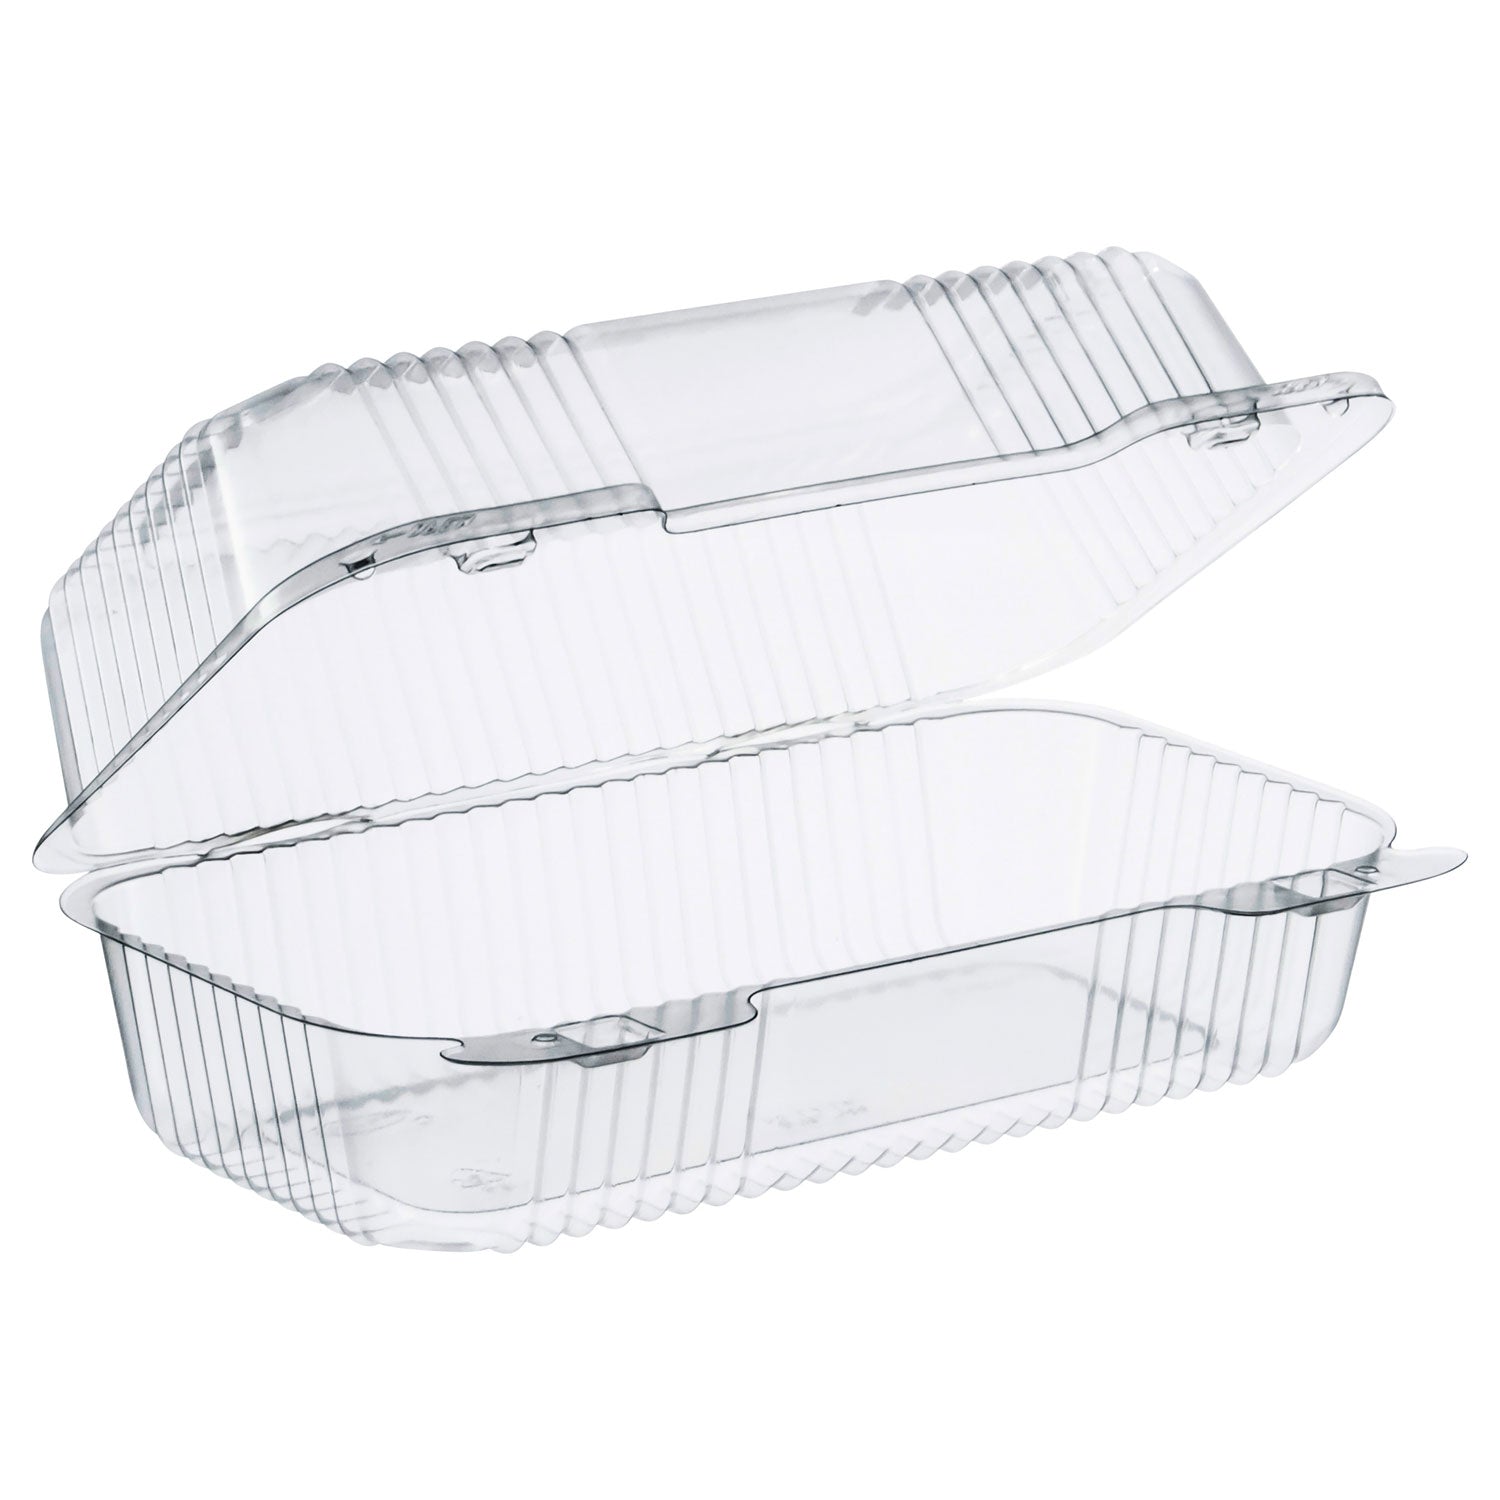 staylock-clear-hinged-lid-containers-54-x-9-x-35-clear-plastic-250-carton_dccc35ut1 - 1